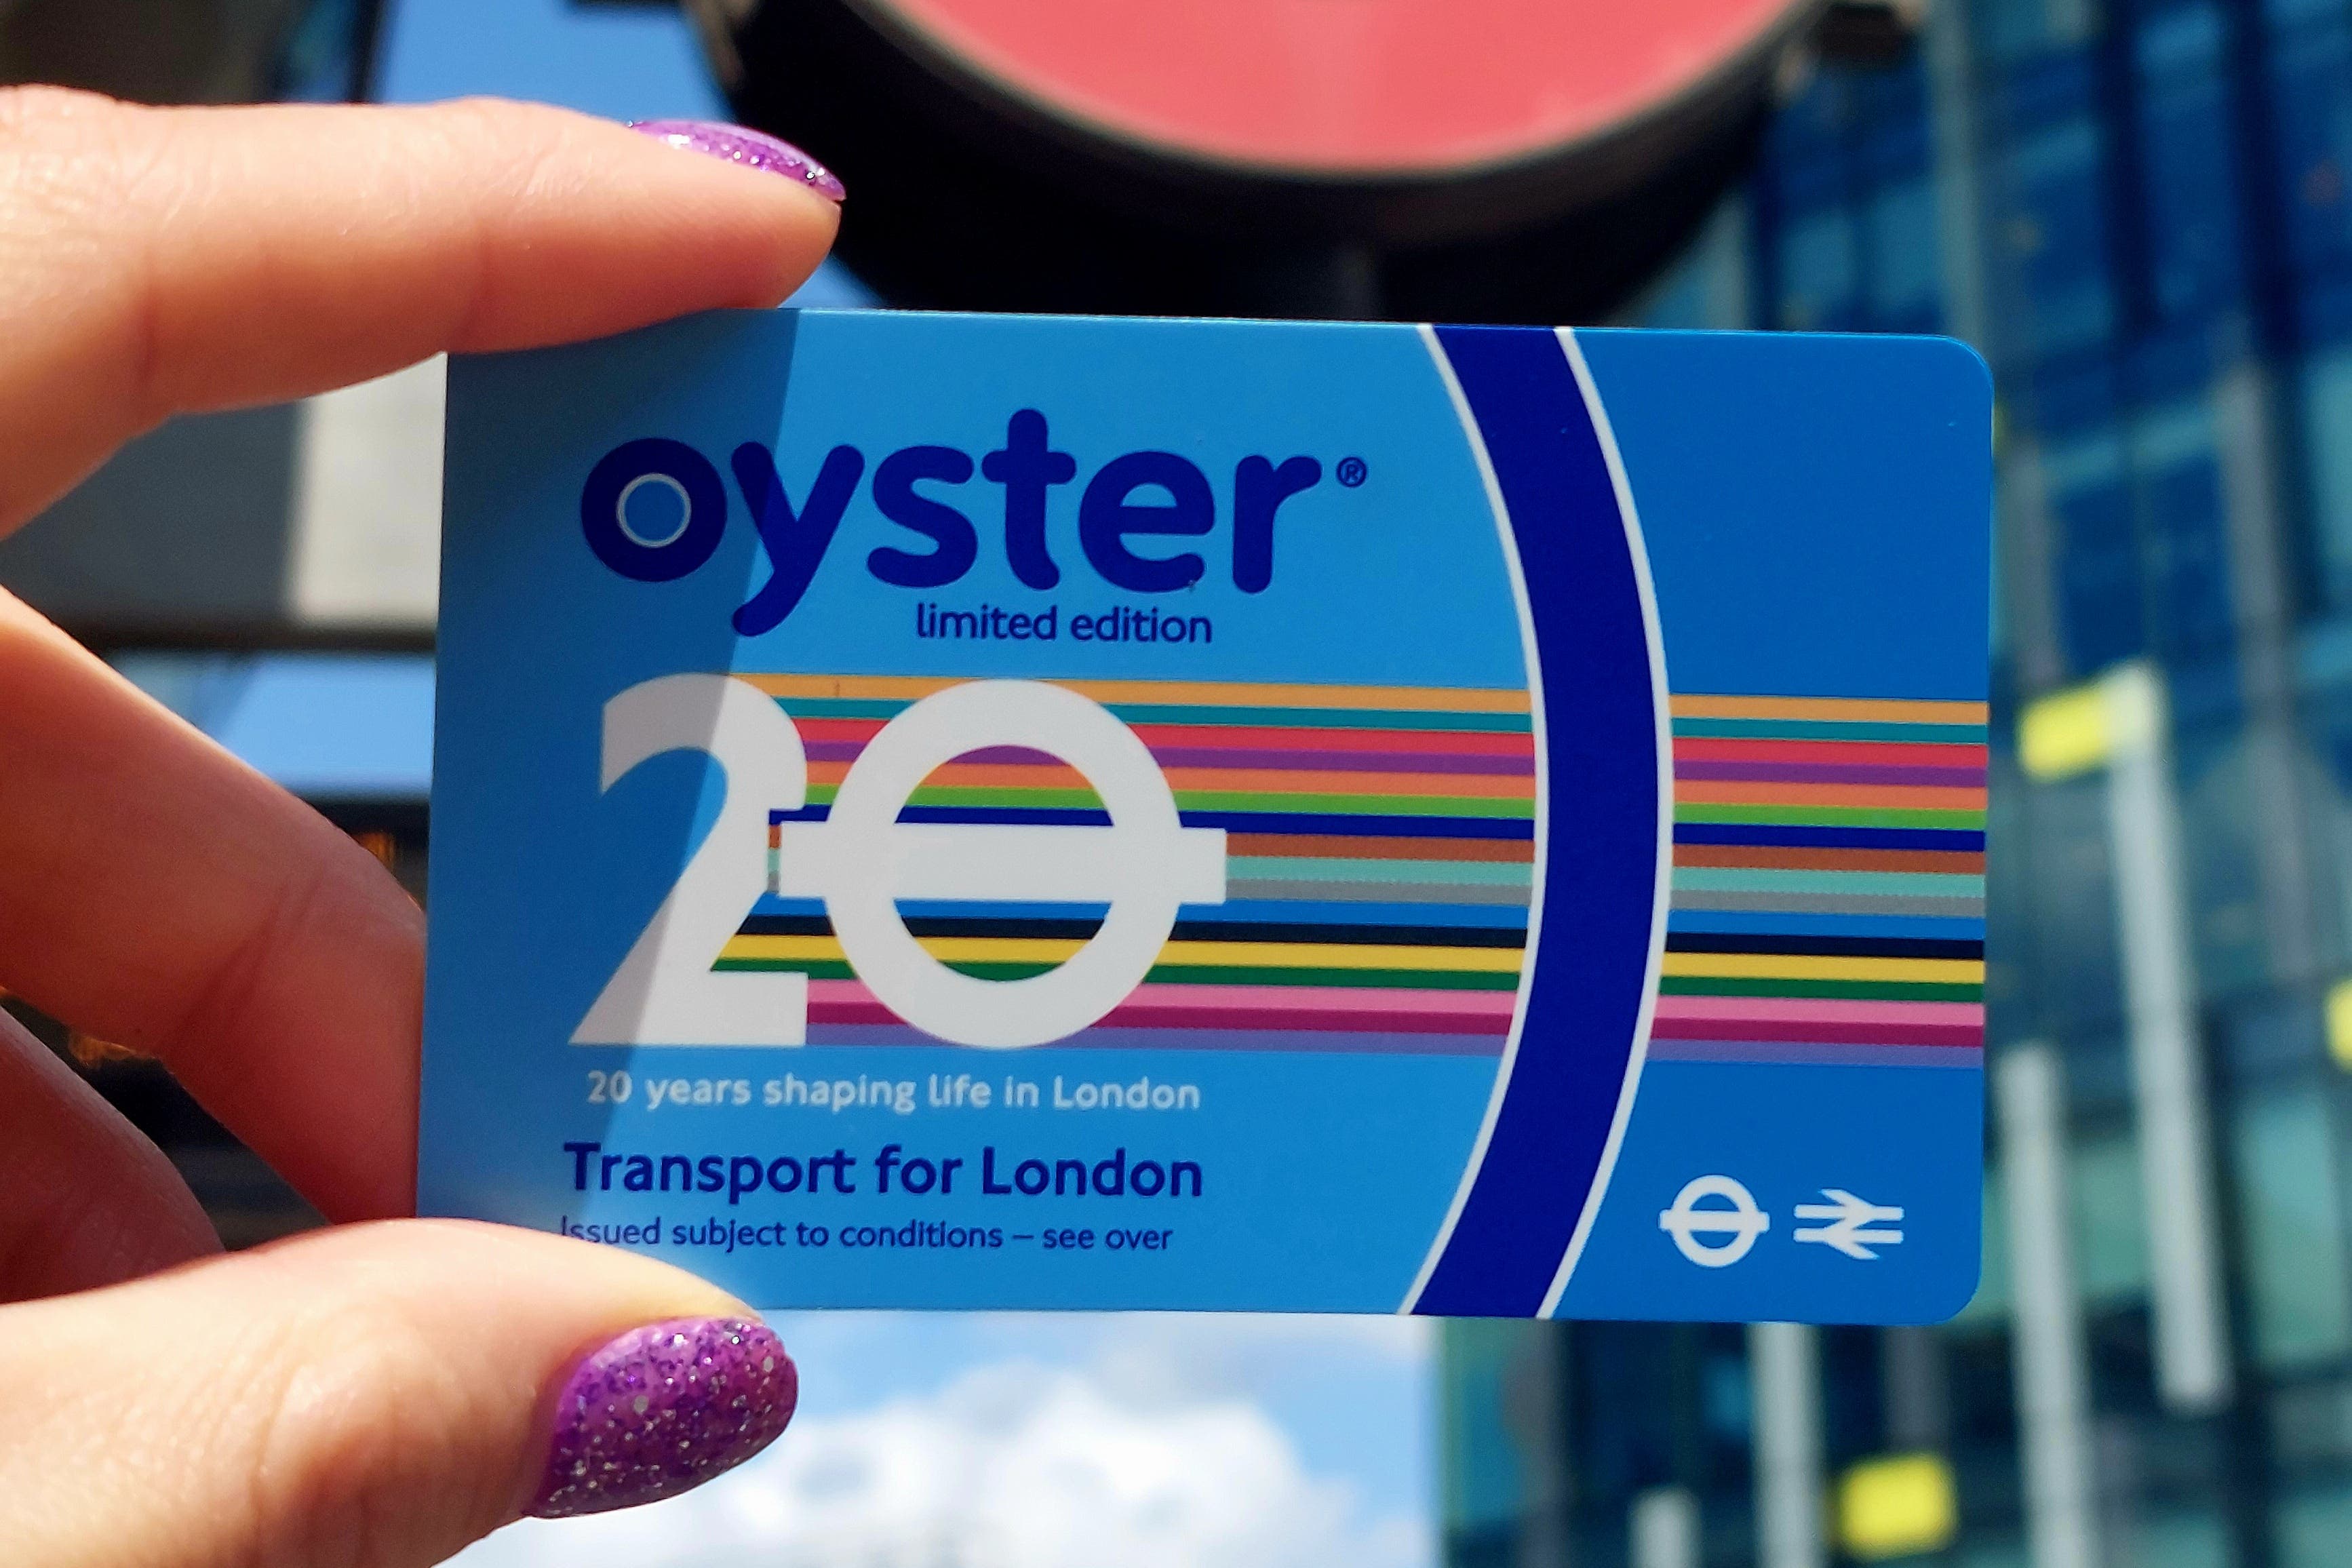 New Oyster card released to mark 20th anniversary